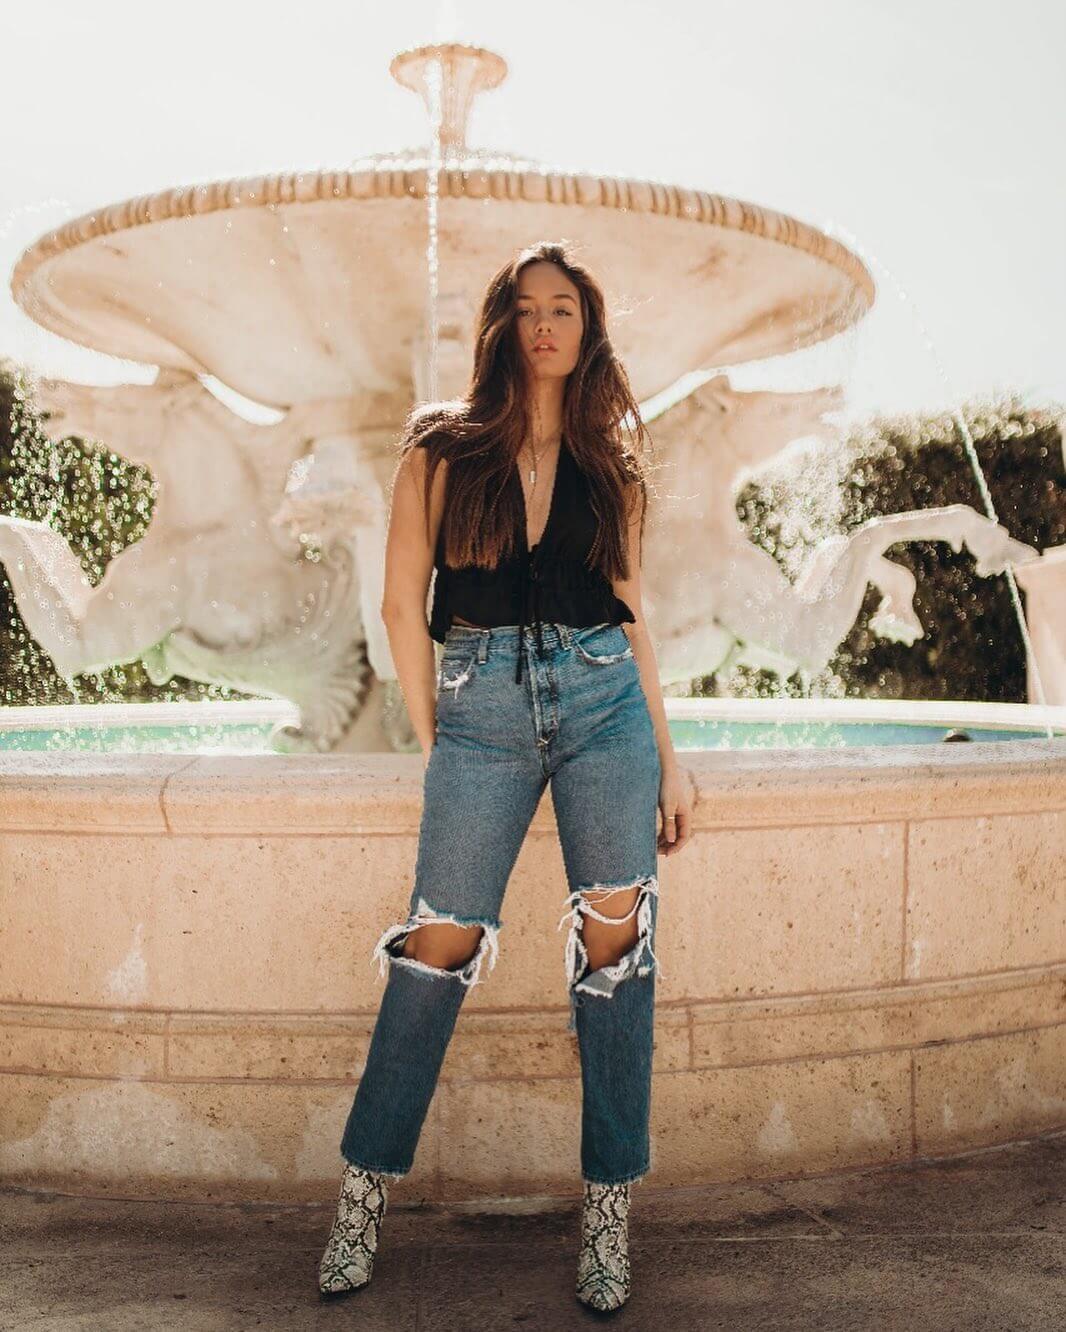 Makayla Storms In Black Top With Ripped Jeans